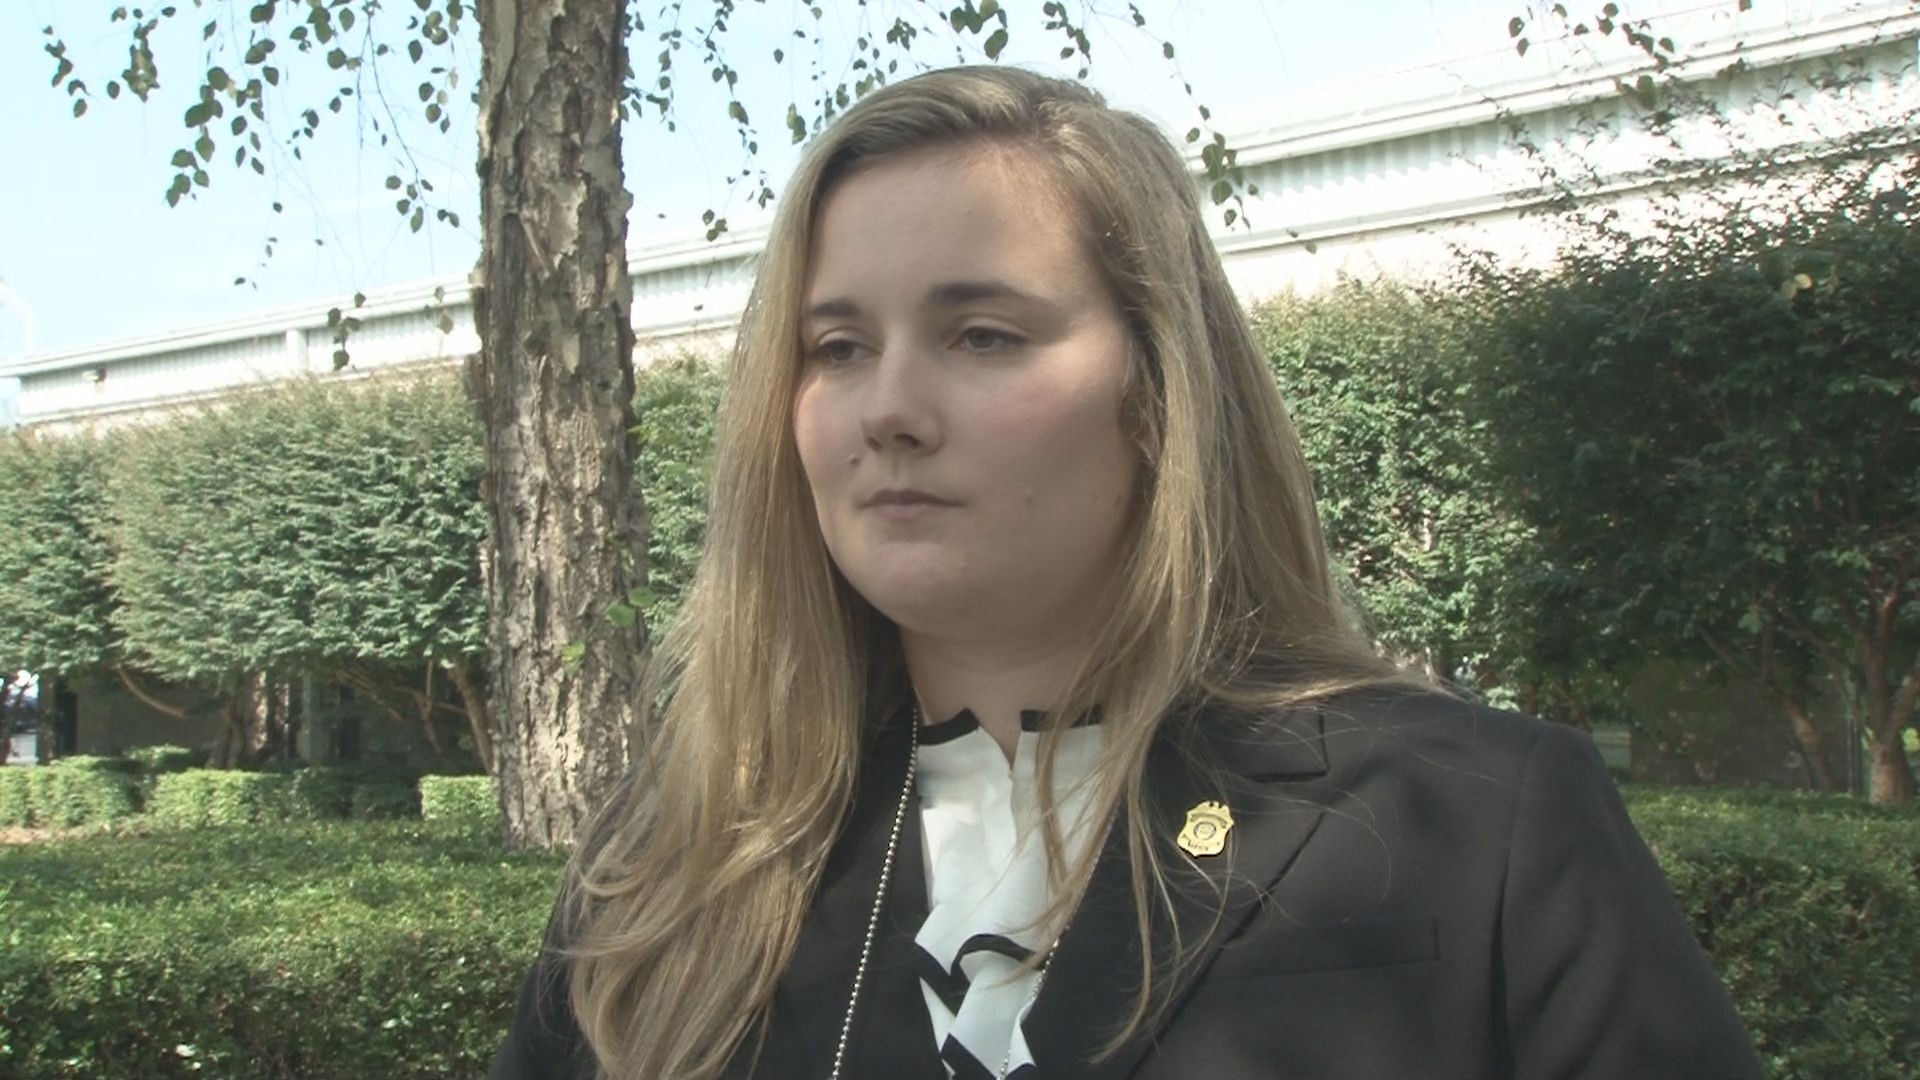 Catherine Jumper graduated from the Justice Academy in Columbia on Friday. Her father, Greenville County's Sgt. Conley Jumper, died in the line of duty in 2020.